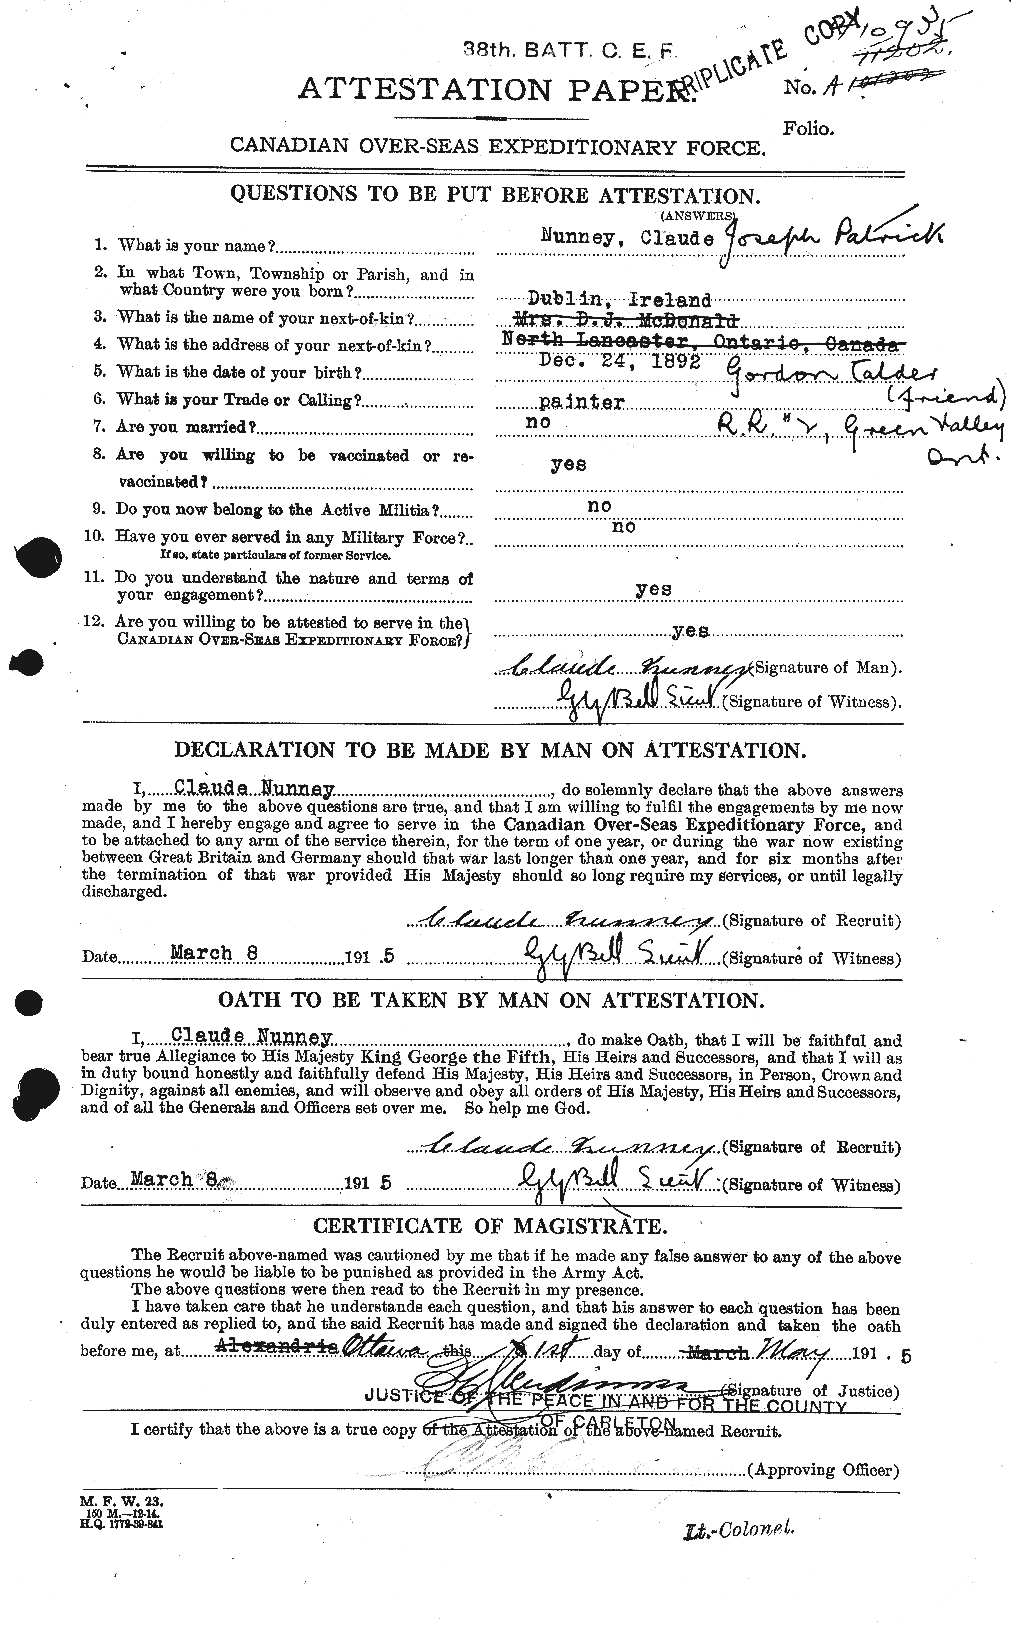 Personnel Records of the First World War - CEF 206299a